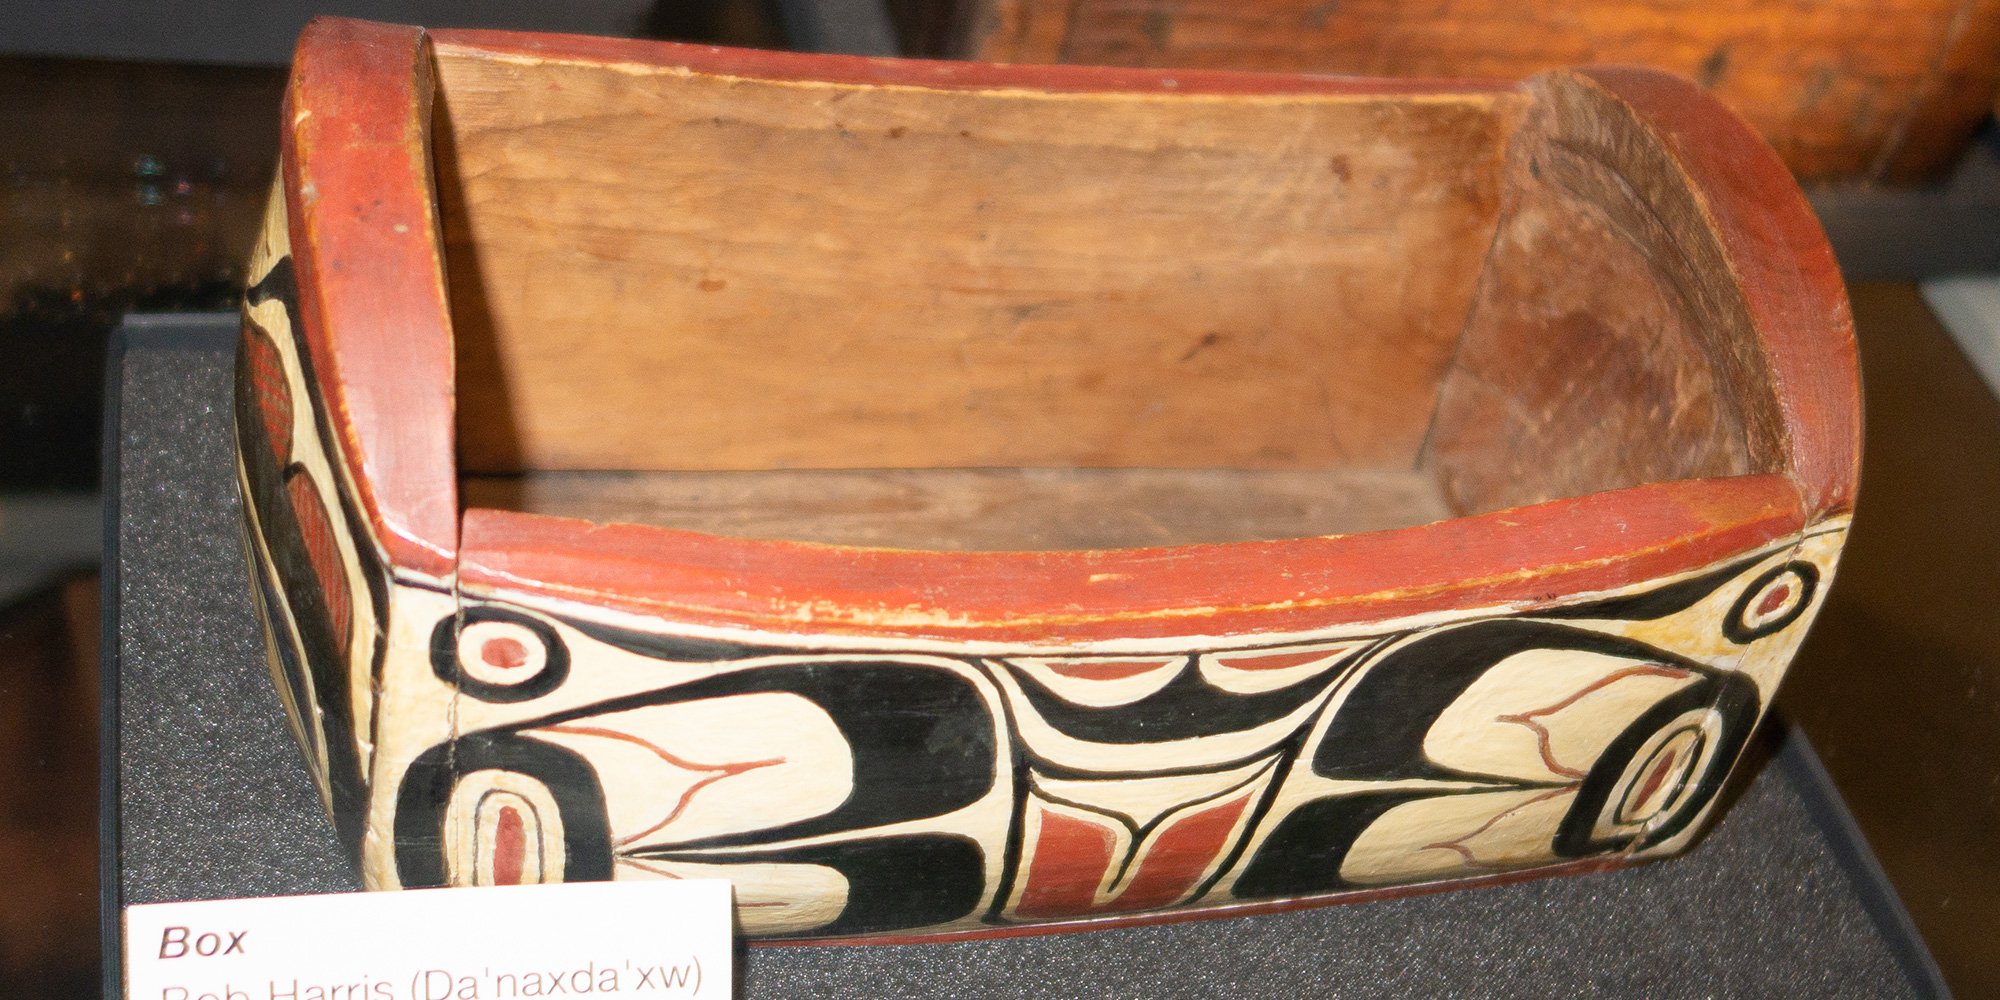 Small bentbox UBC, Museum of Anthropology, Vancouver, British Columbia, Canada, 2017